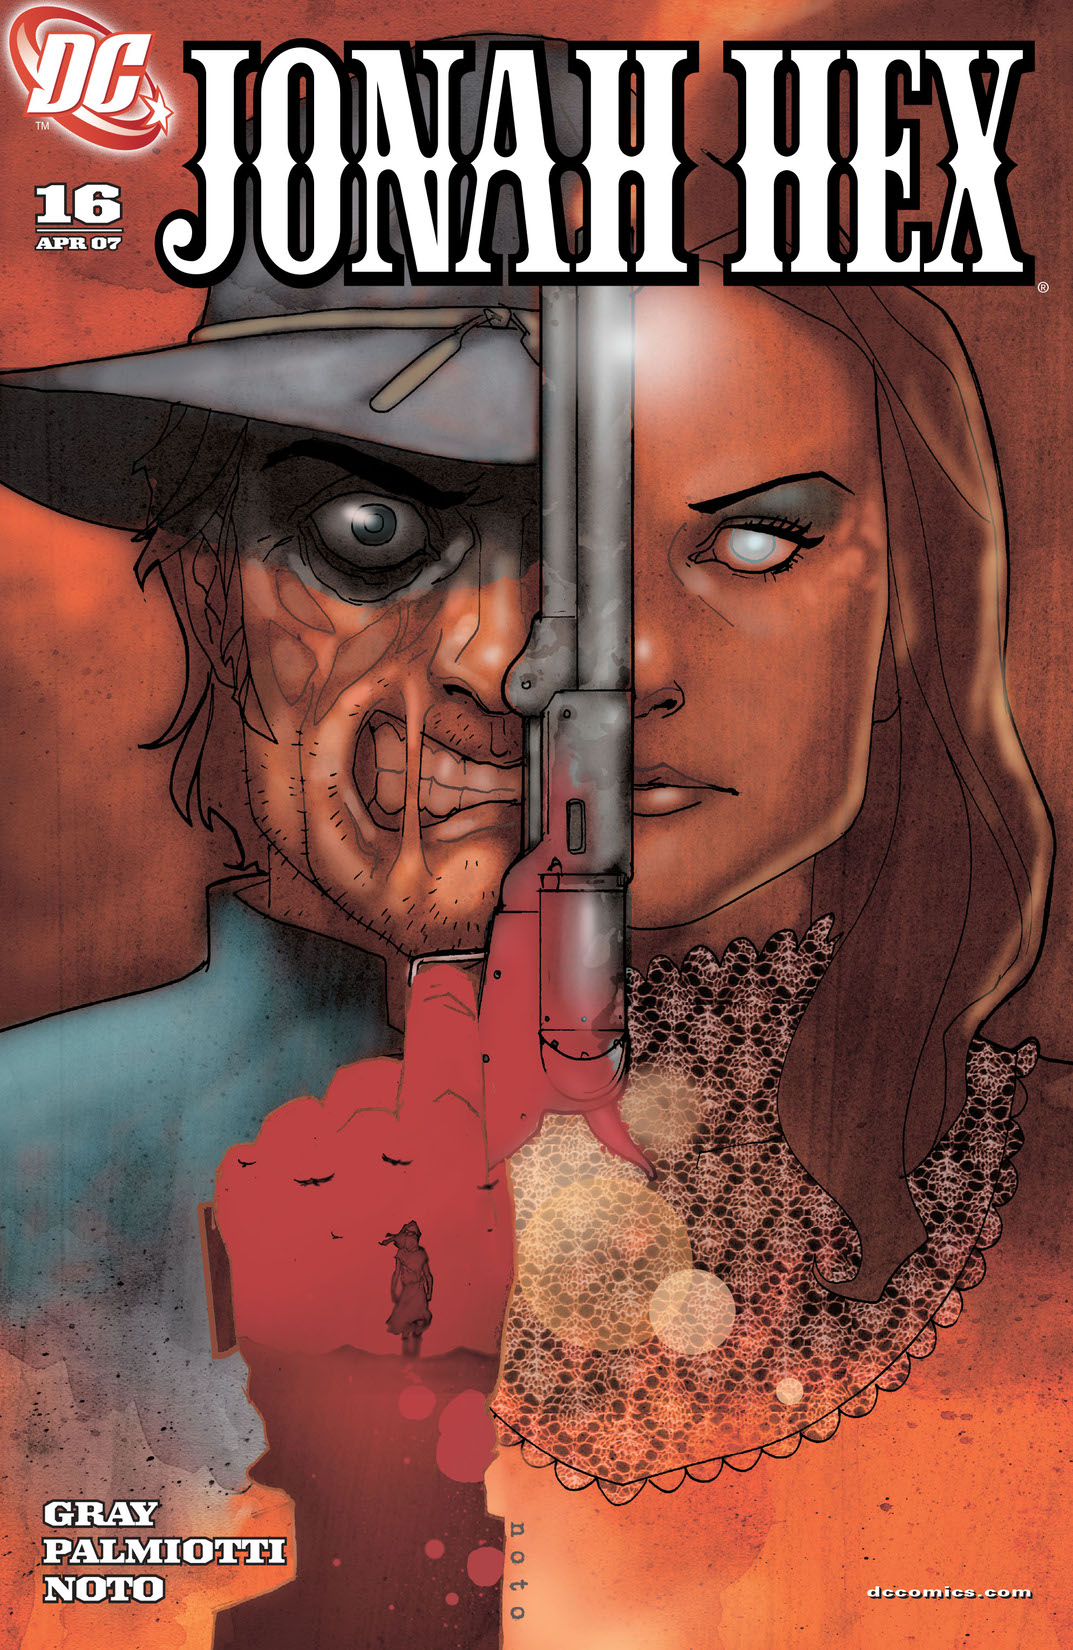 Jonah Hex #16 preview images